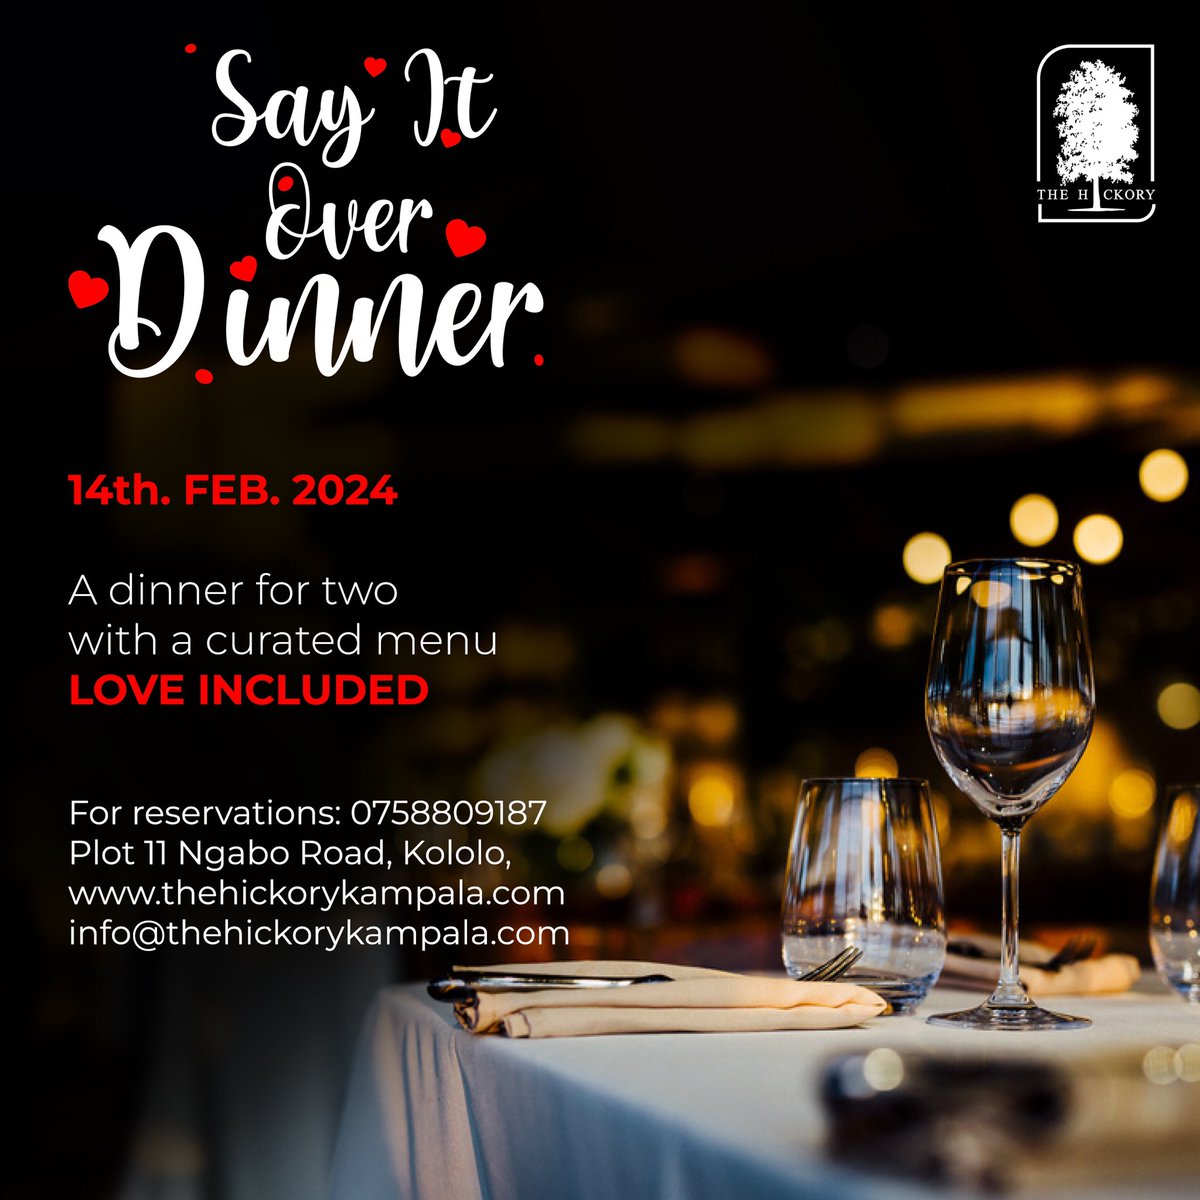 💖Happy Valentines to all our lovely patrons. We hope to see you celebrate love with us today. 

Choose the perfect setting for your extraordinary Valentine’s Day date to enjoy your romantic meal.
#TheHickory #ValentinesDinner